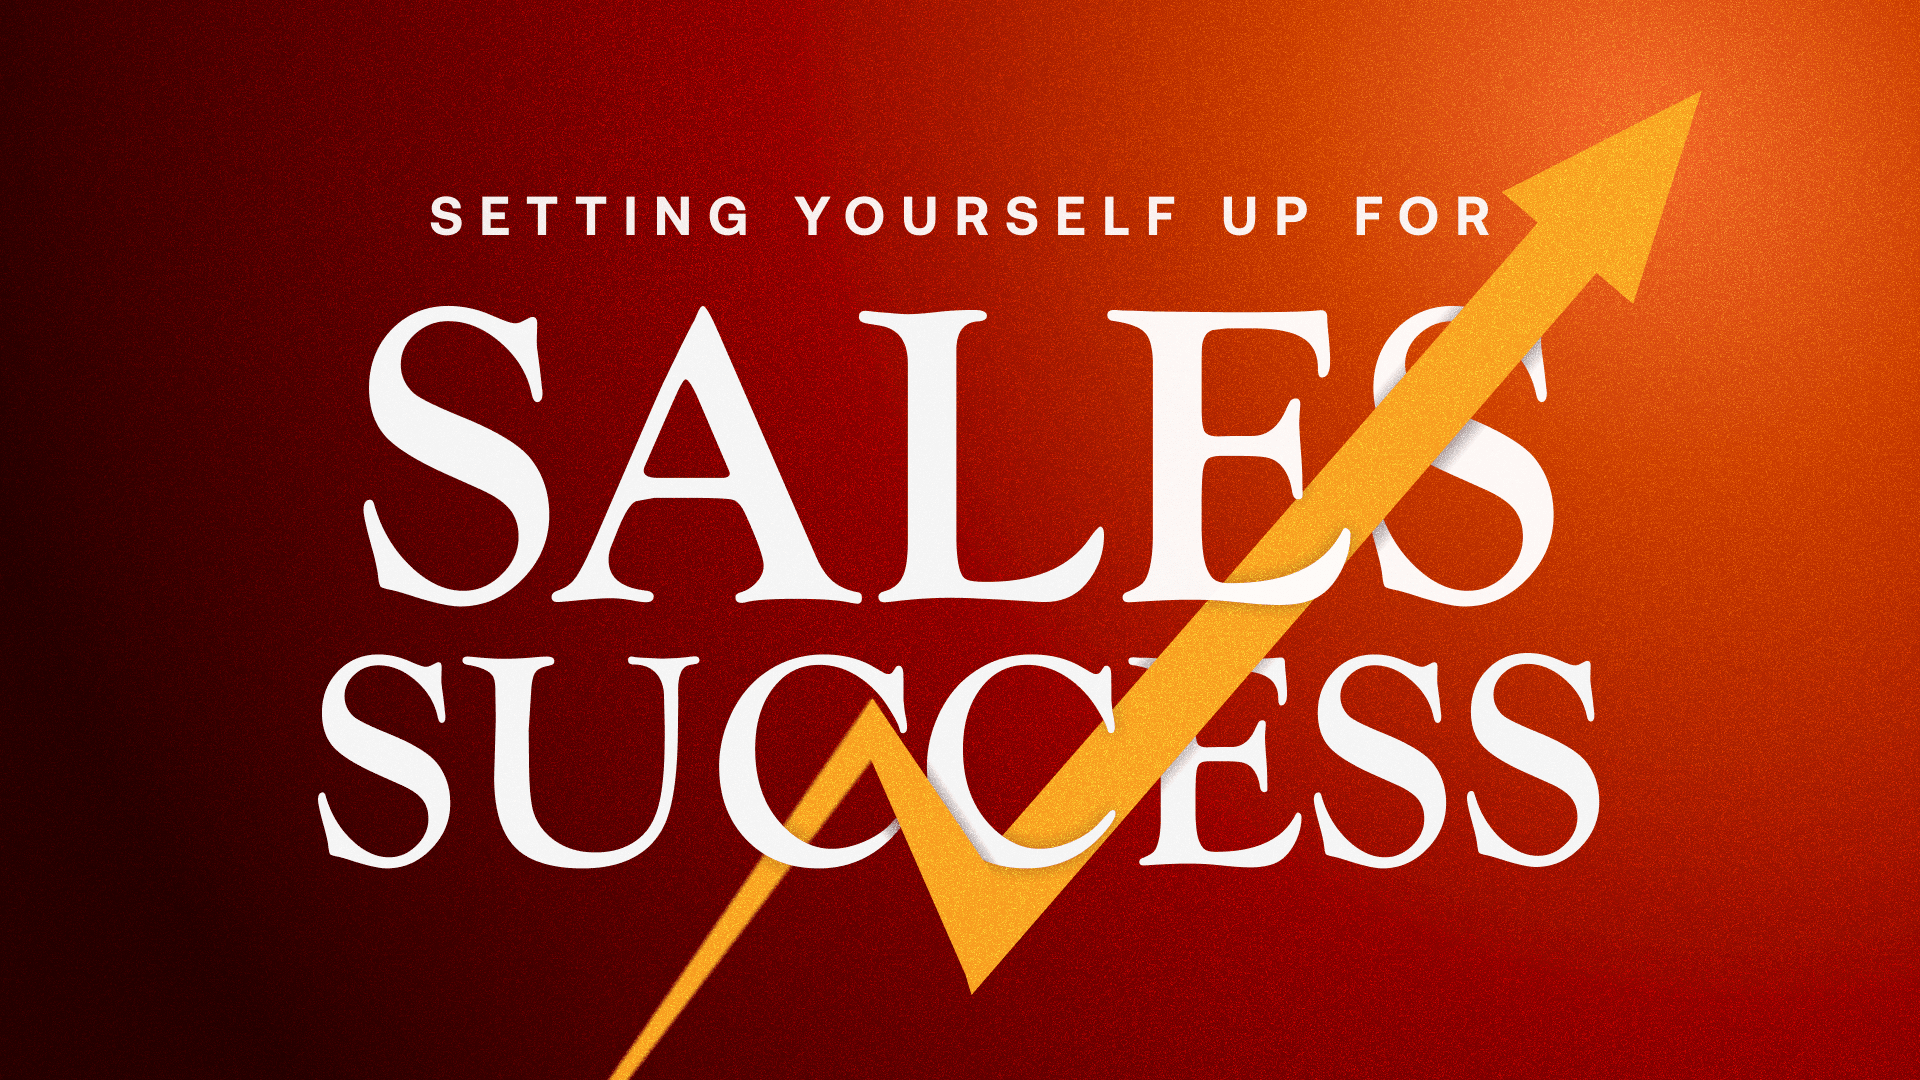 240312_COURSE_SETTING_YOURSELF_UP_FOR_SALES_SUCCESS_3_1_1_ijtszf